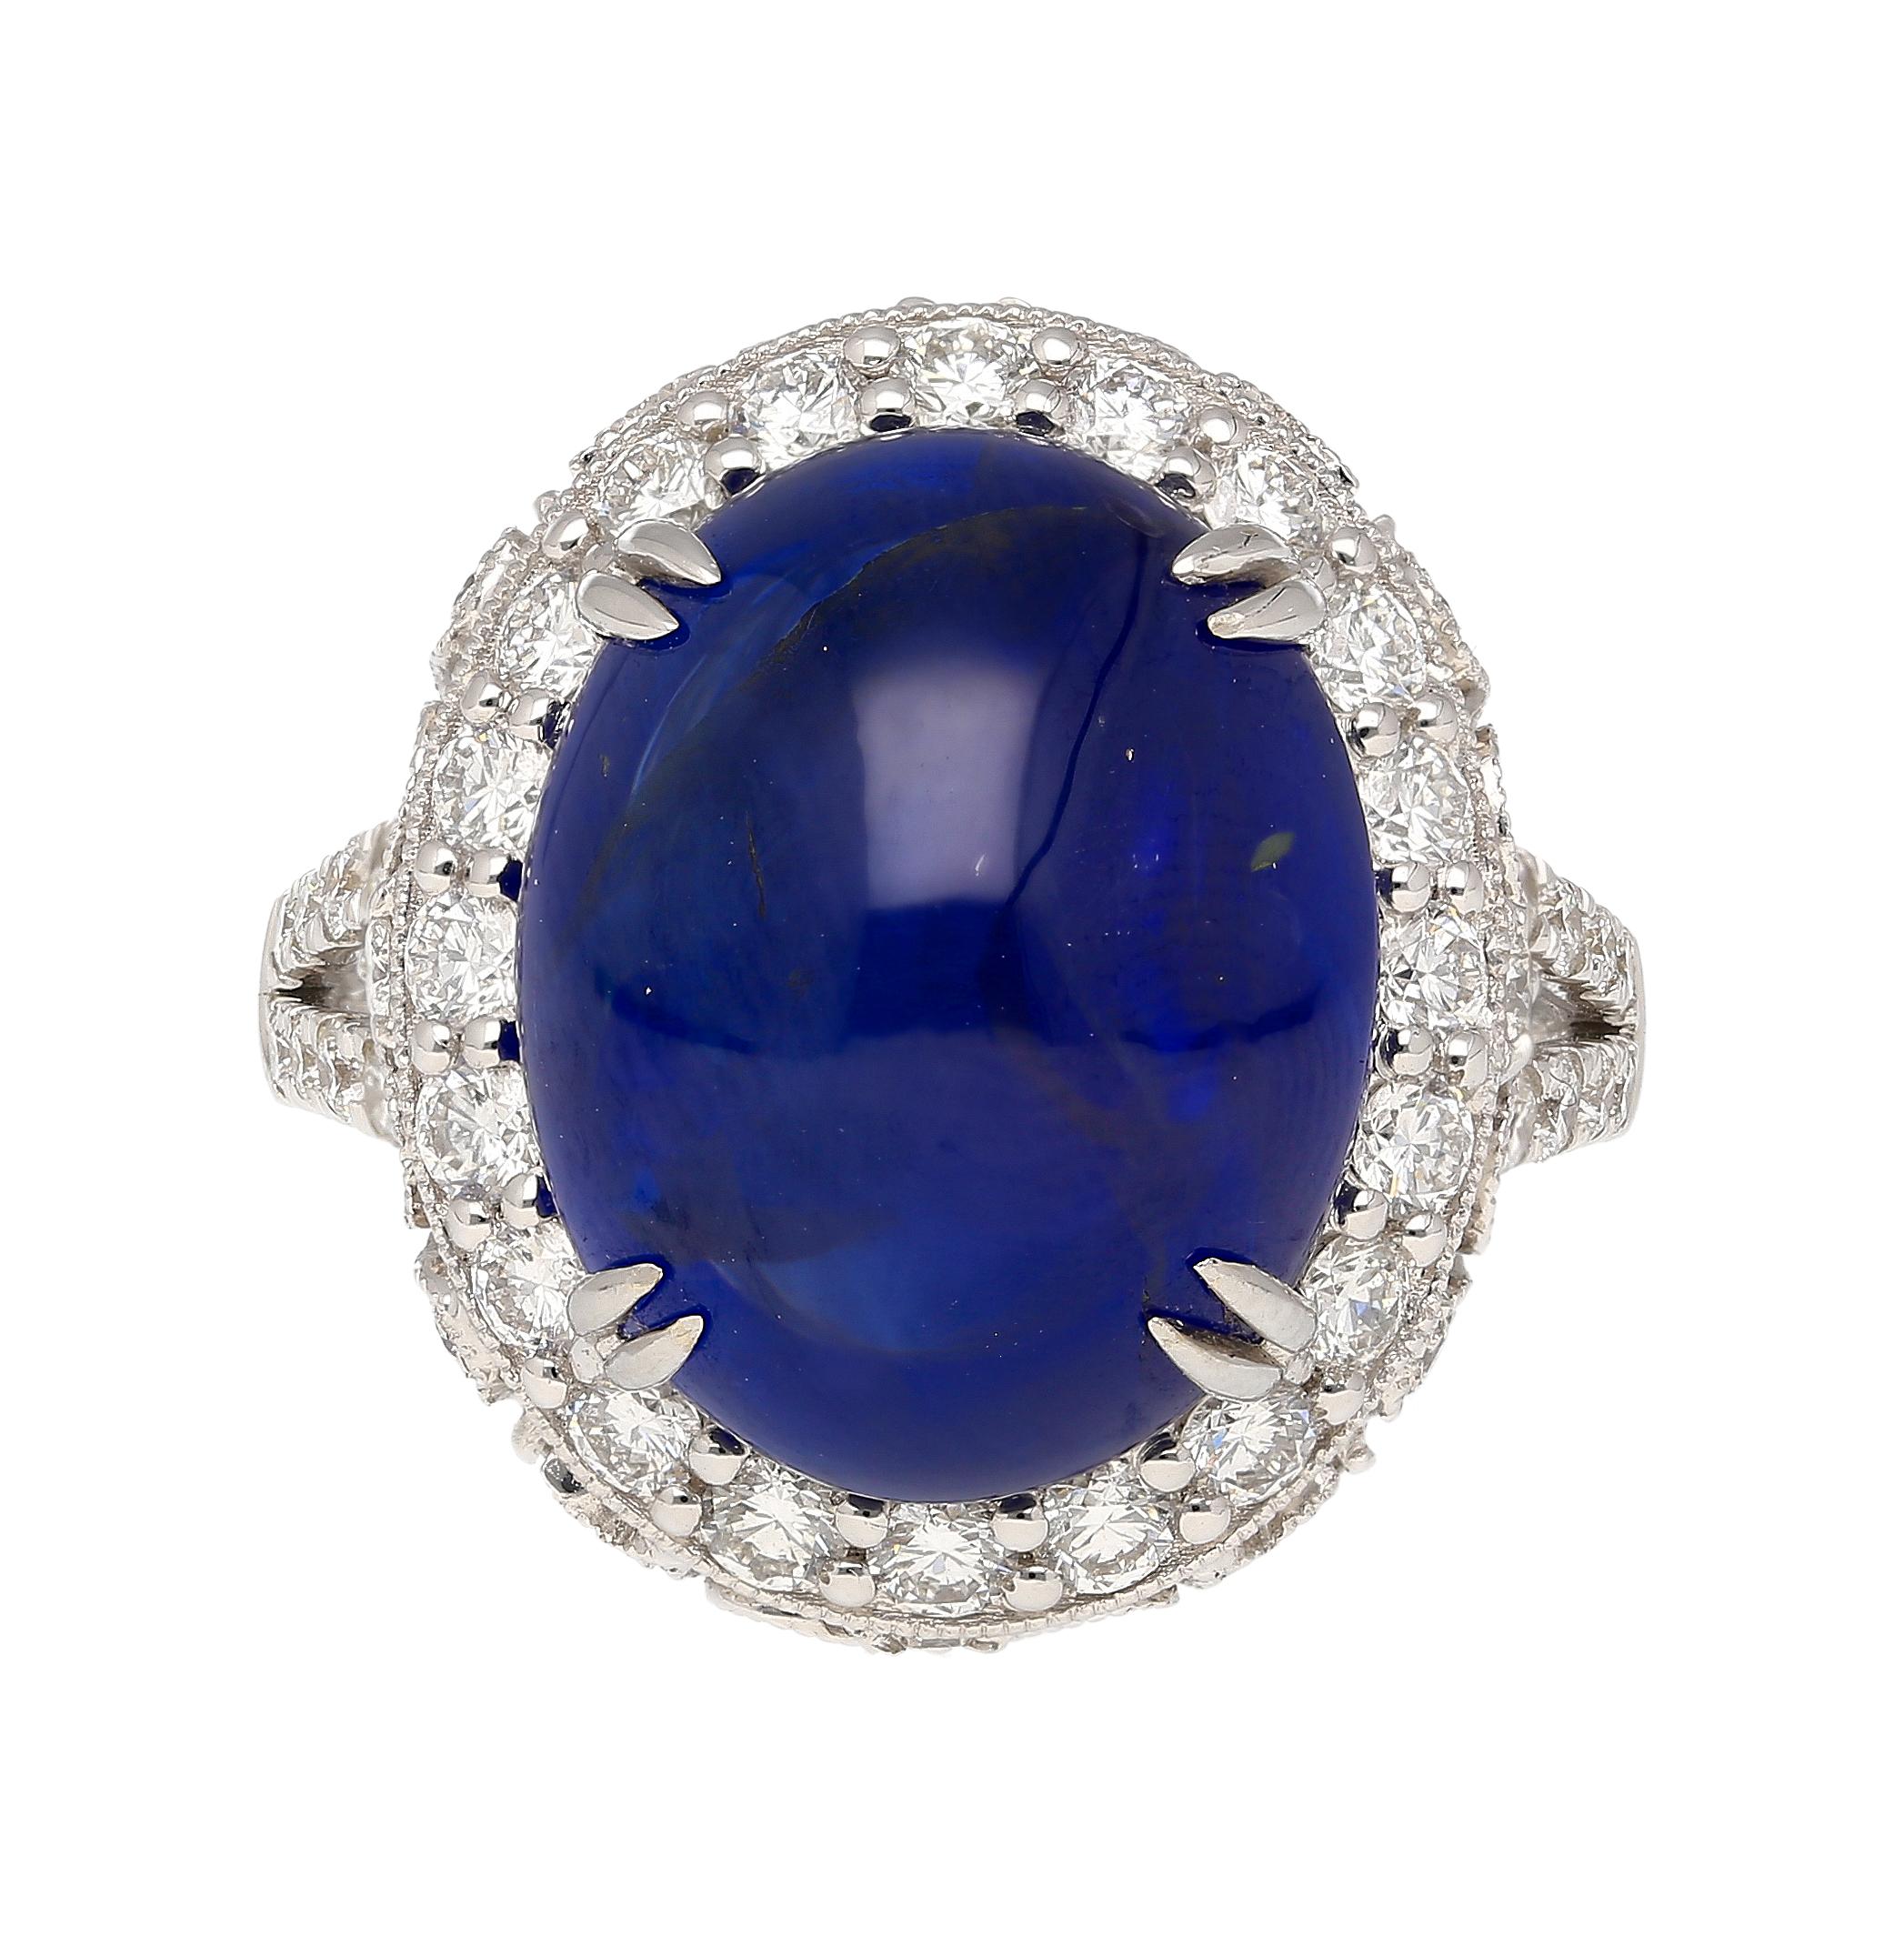 AGL certified 16.68 carat oval cut natural Ceylon origin Blue Sapphire and Diamond ring. Crafted in 18K white gold, this extraordinary piece showcases a captivating cabochon cut of exceptional quality and beauty. Adorned with a dazzling 1.32 carats